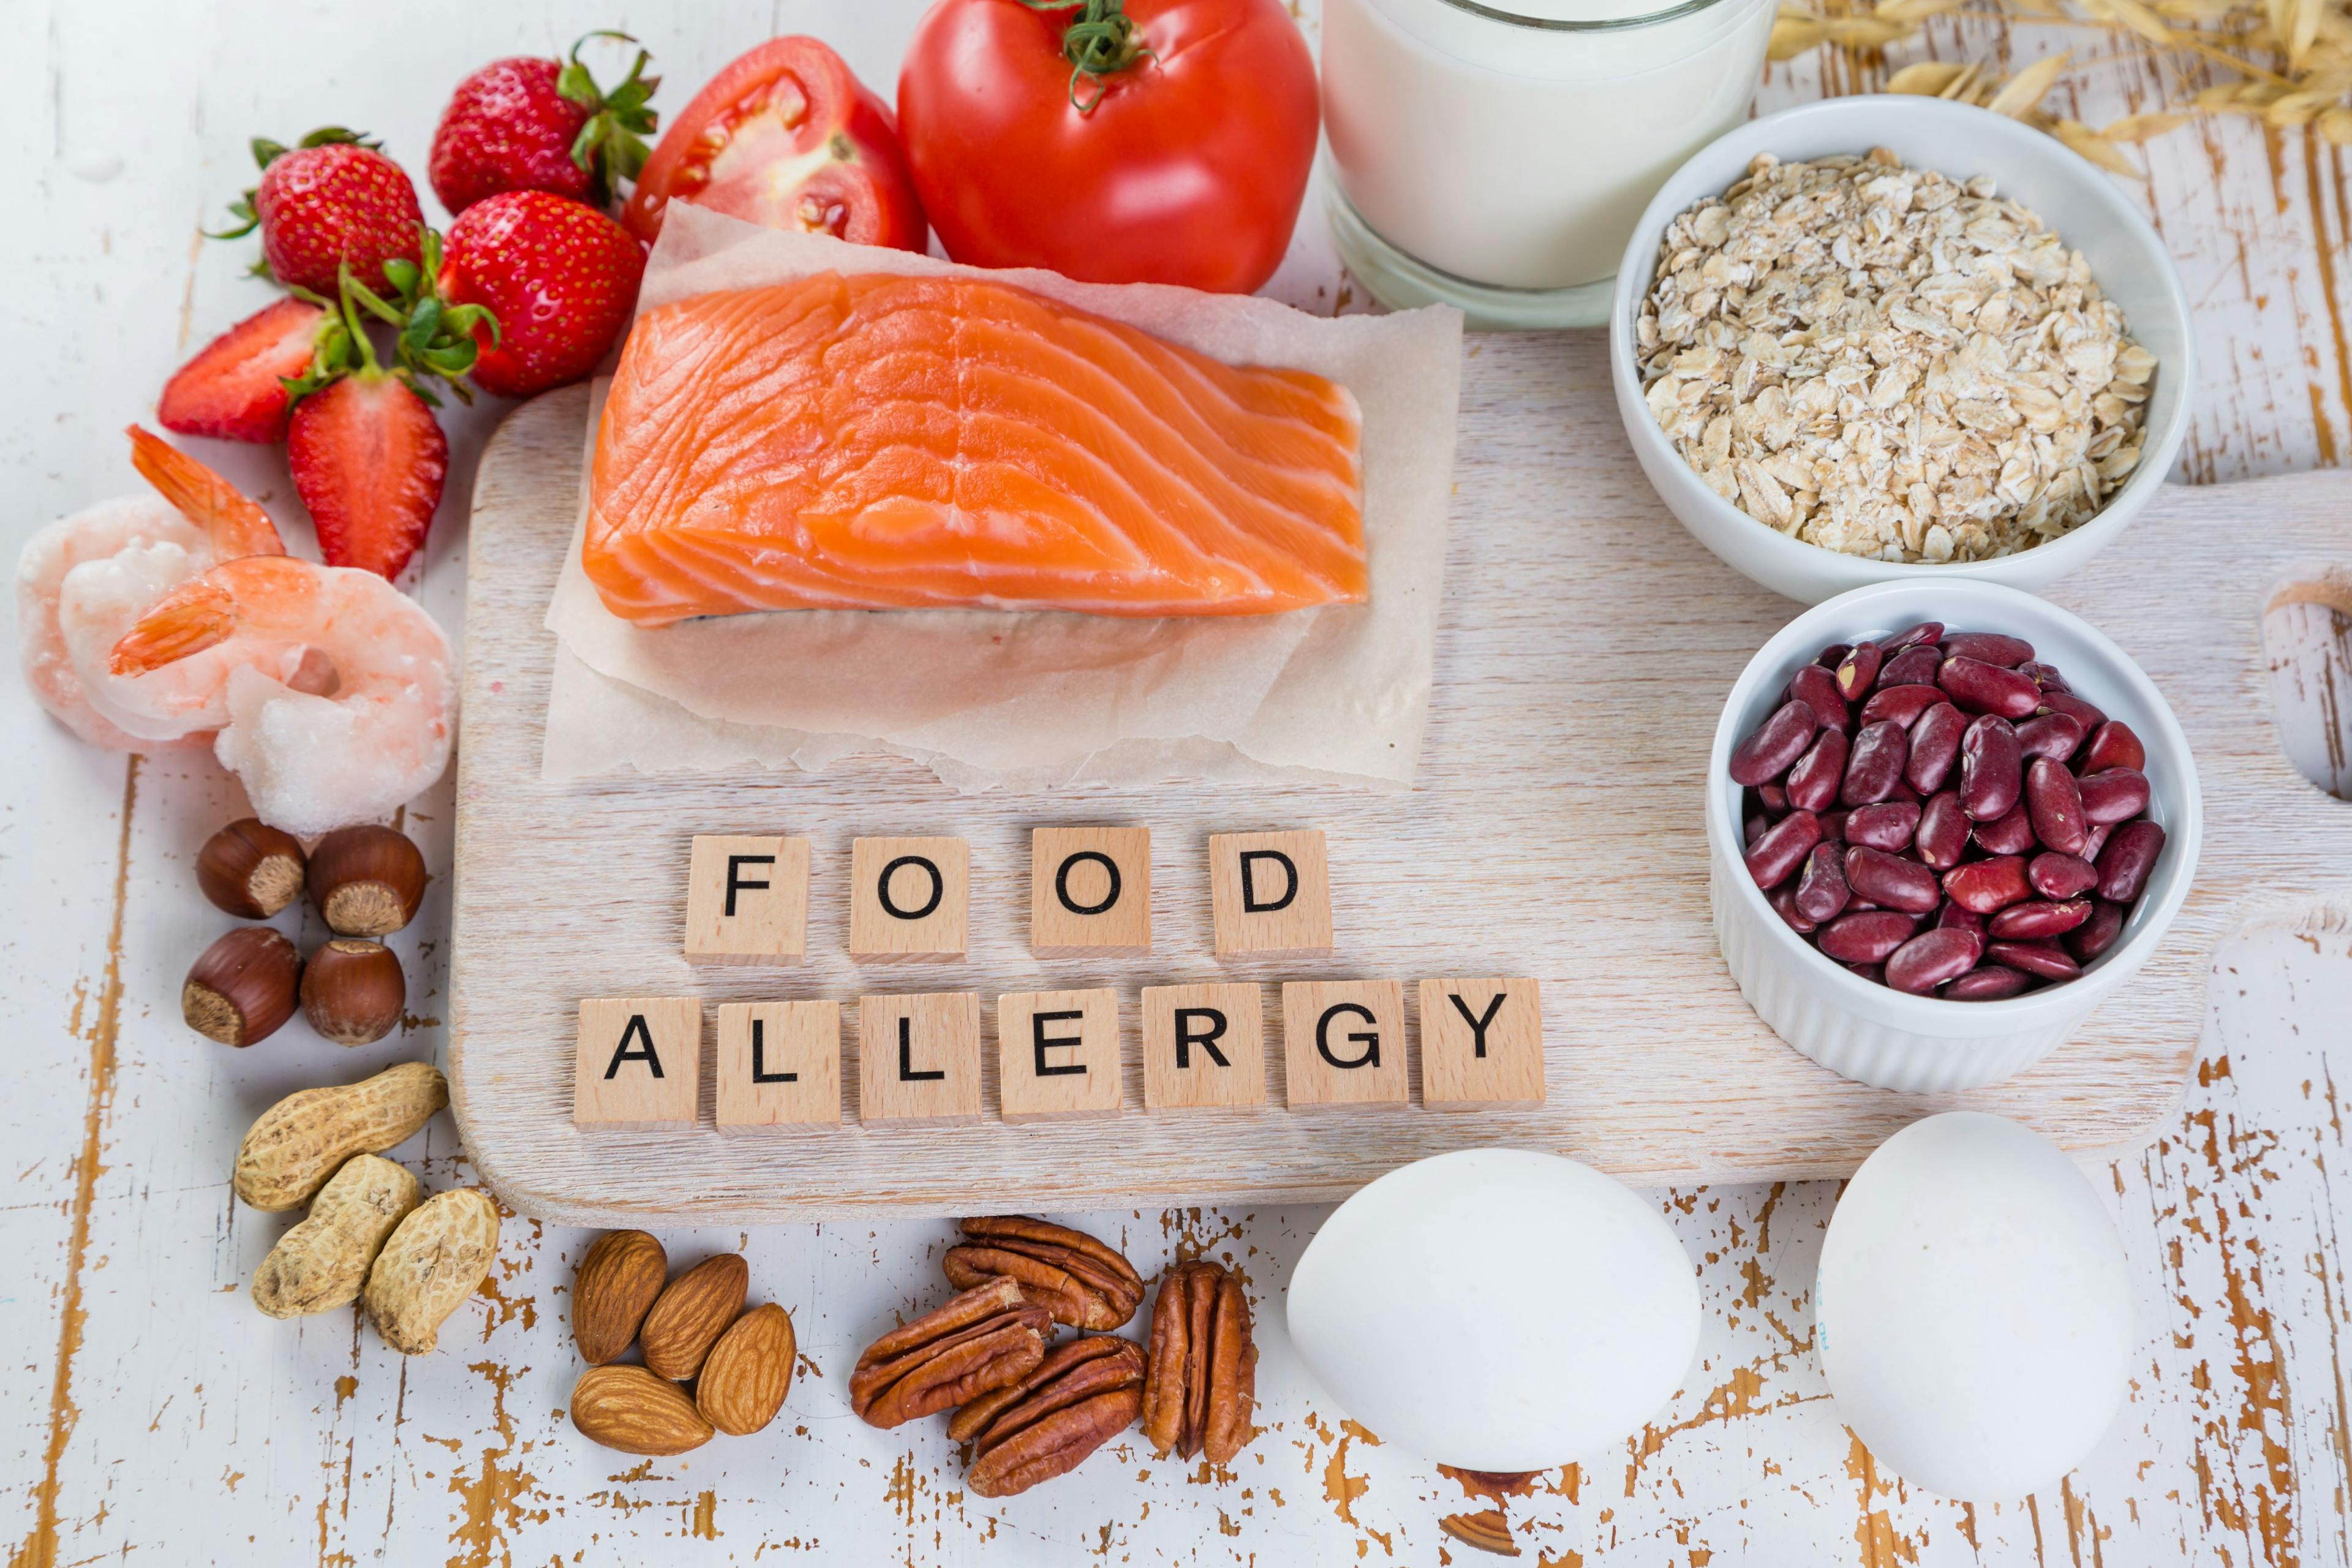 The latest news on food allergies in children